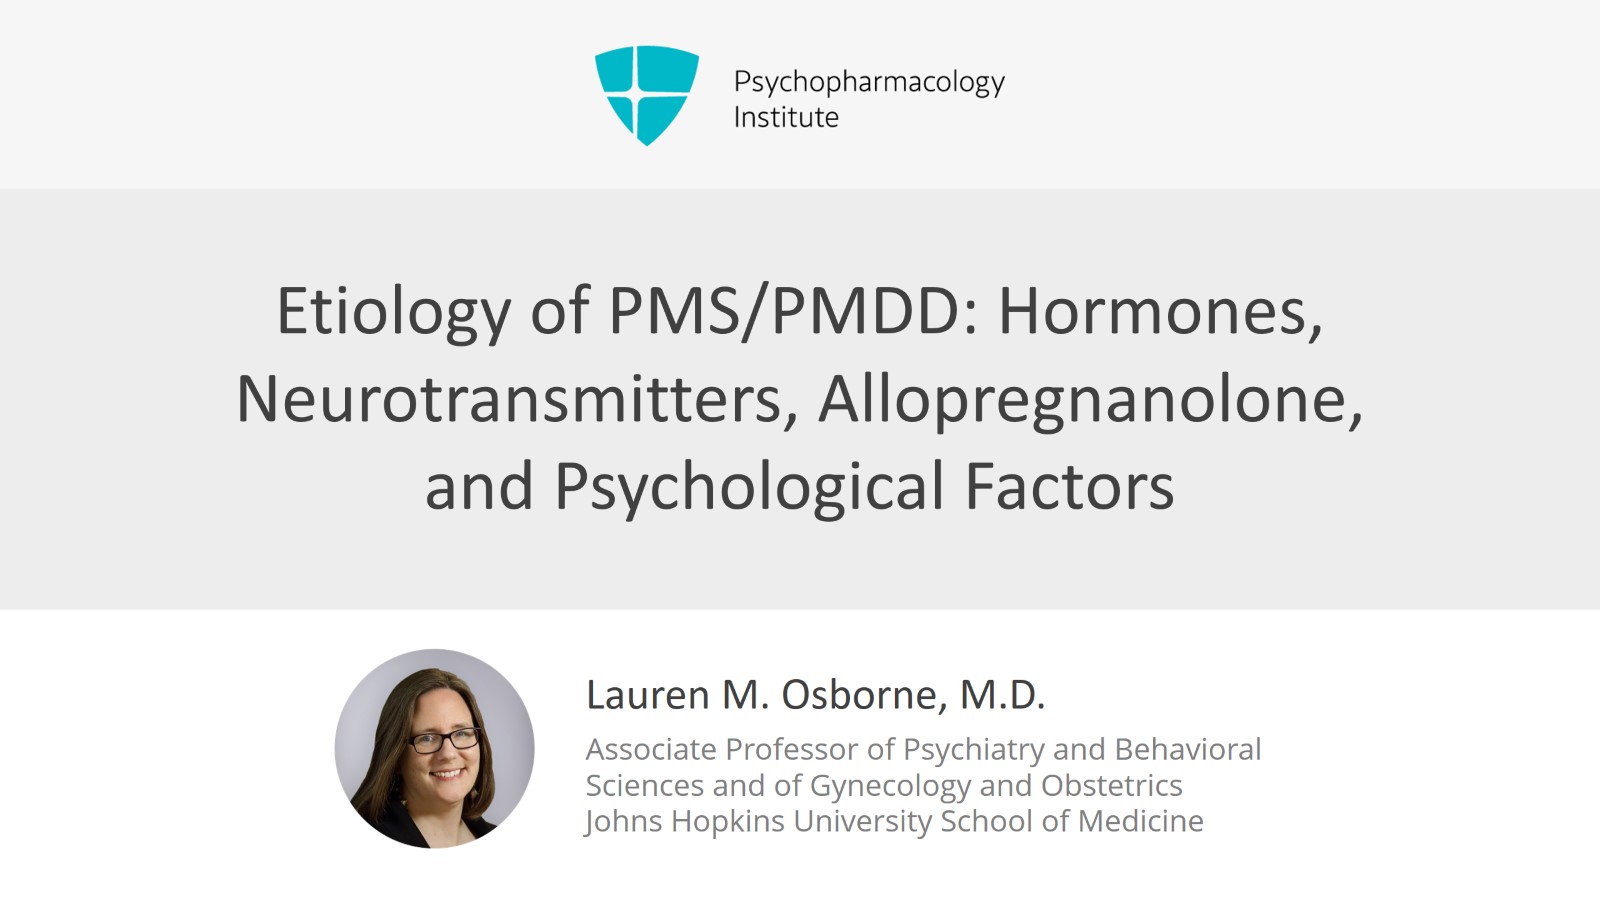 PMDD may be described as Premenstrual Syndrome (PMS) on steroids